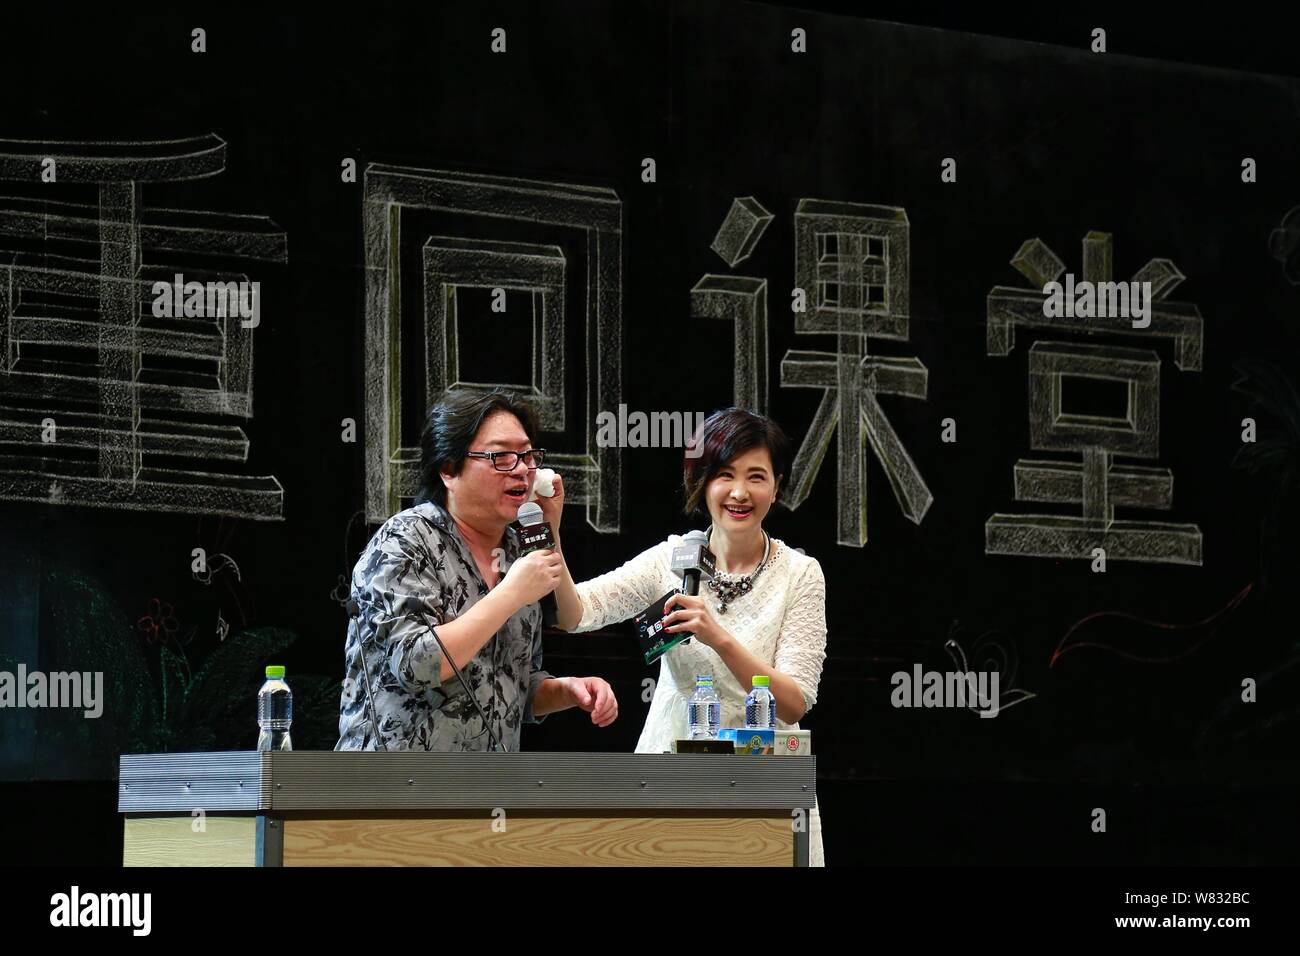 Chinese music producer Gao Xiaosong, left, Chairman of Alibaba Entertainment Strategic Committee and co-founder of Alibaba Music Group, gives a lesson Stock Photo